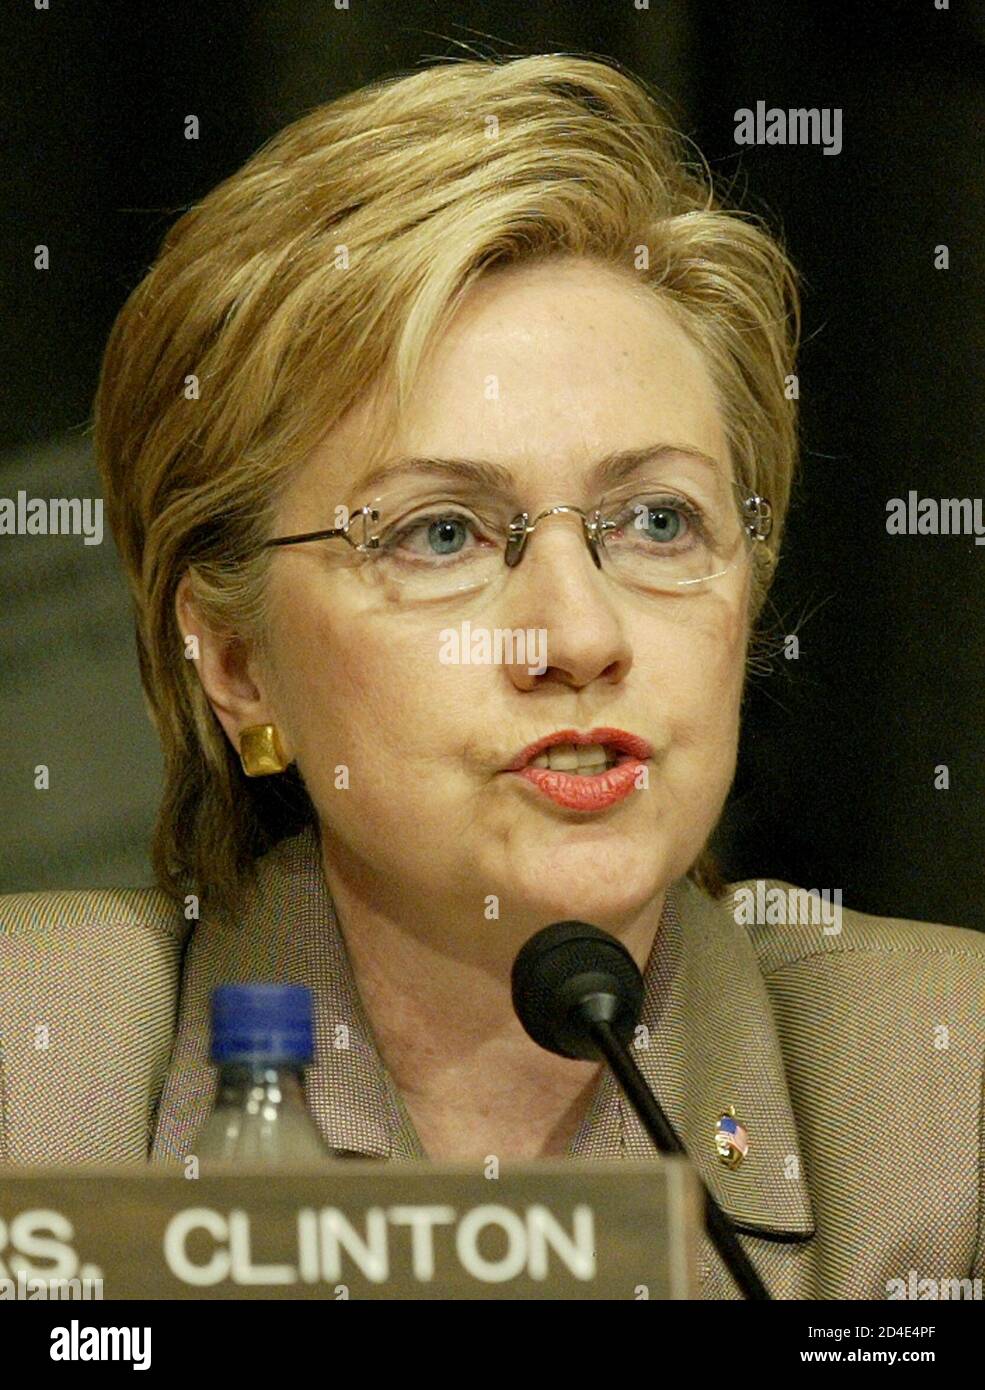 Senator Hillary Rodham Clinton (D-MA) questions U.S. Secretary of Defense Donald Rumsfeld during his testimony on Iraq prison abuse before the Senate Armed Services Committee on Capitol Hill in Washington, May 7, 2004. Rumsfeld, under pressure to resign, warned that many more pictures showing cruel acts by U.S. personnel would follow those that have shocked the world, eroded Iraqi trust and further savaged the image of the United States in the Arab world. REUTERS/Molly Riley  MMR/JDP Stock Photo